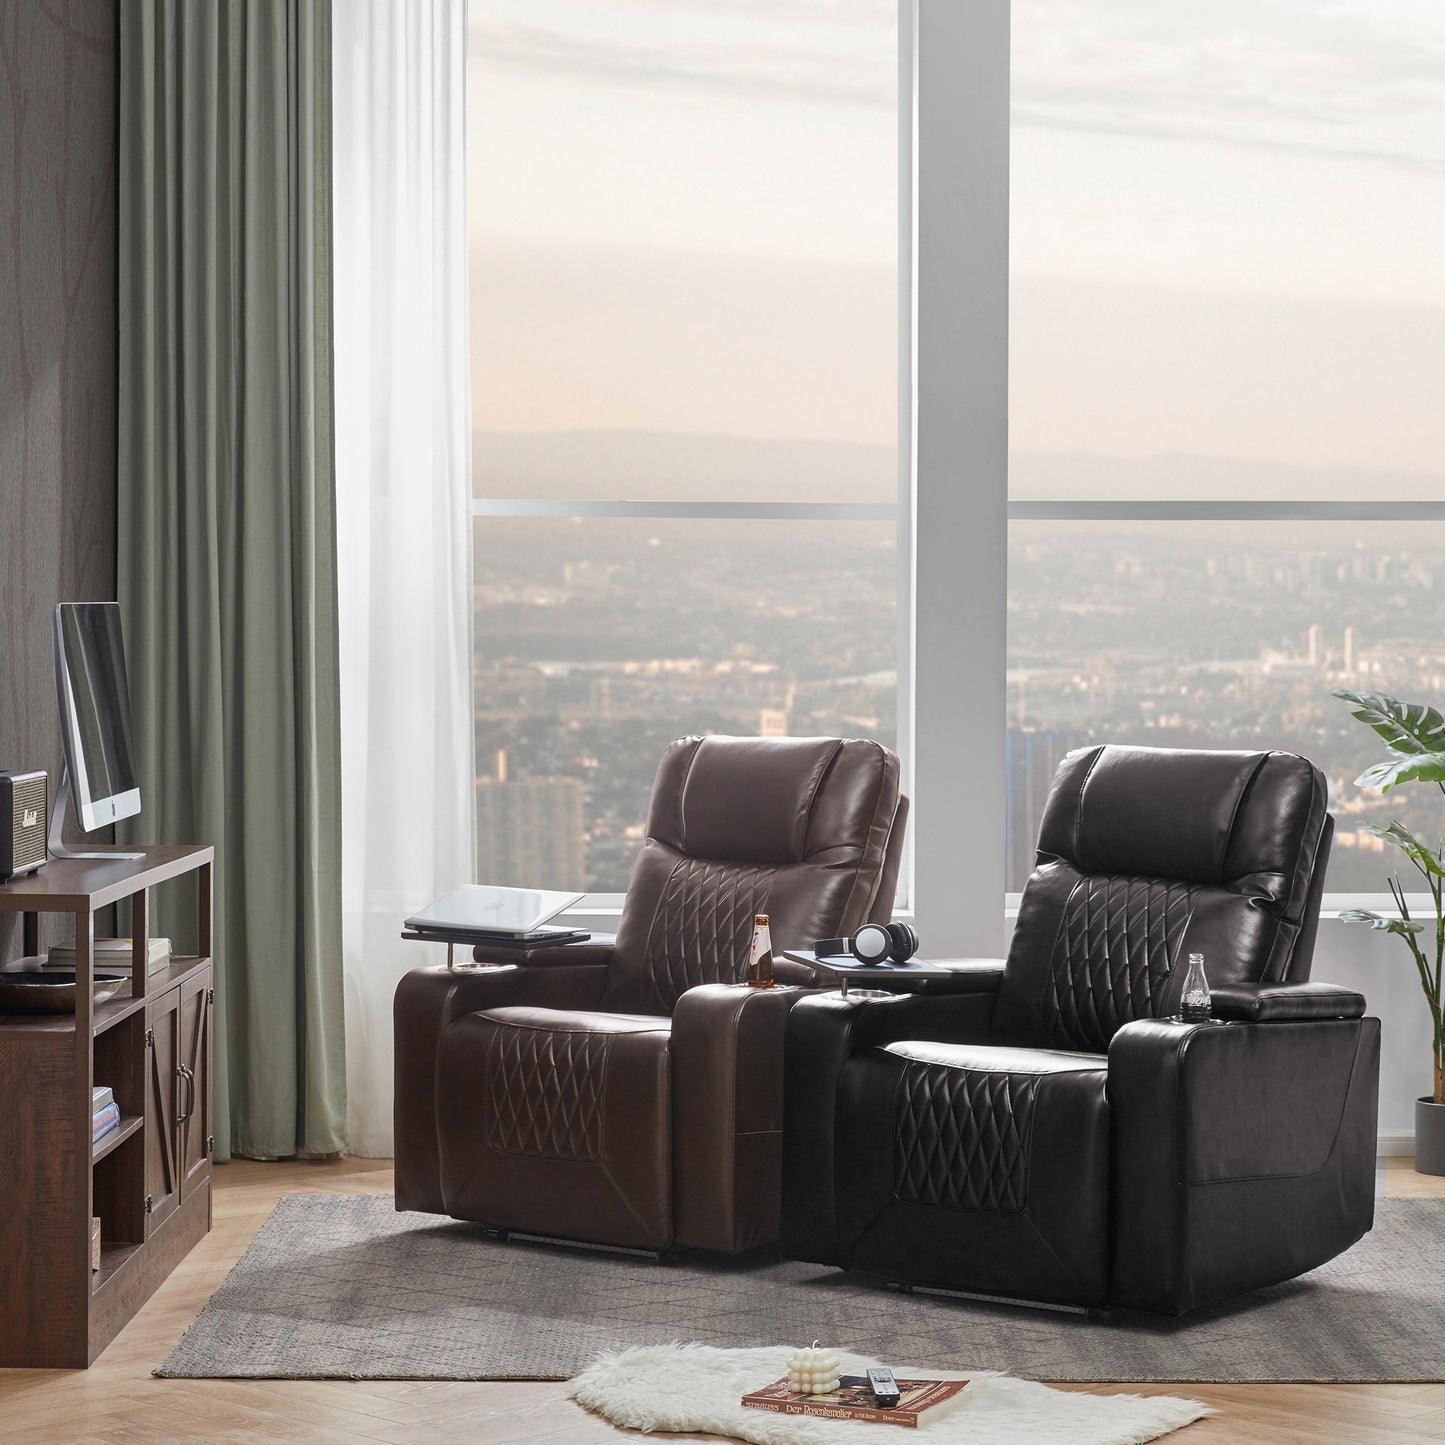 Luxurious Brown Power Motion Recliner with USB Charging Port and Swivel Tray Table